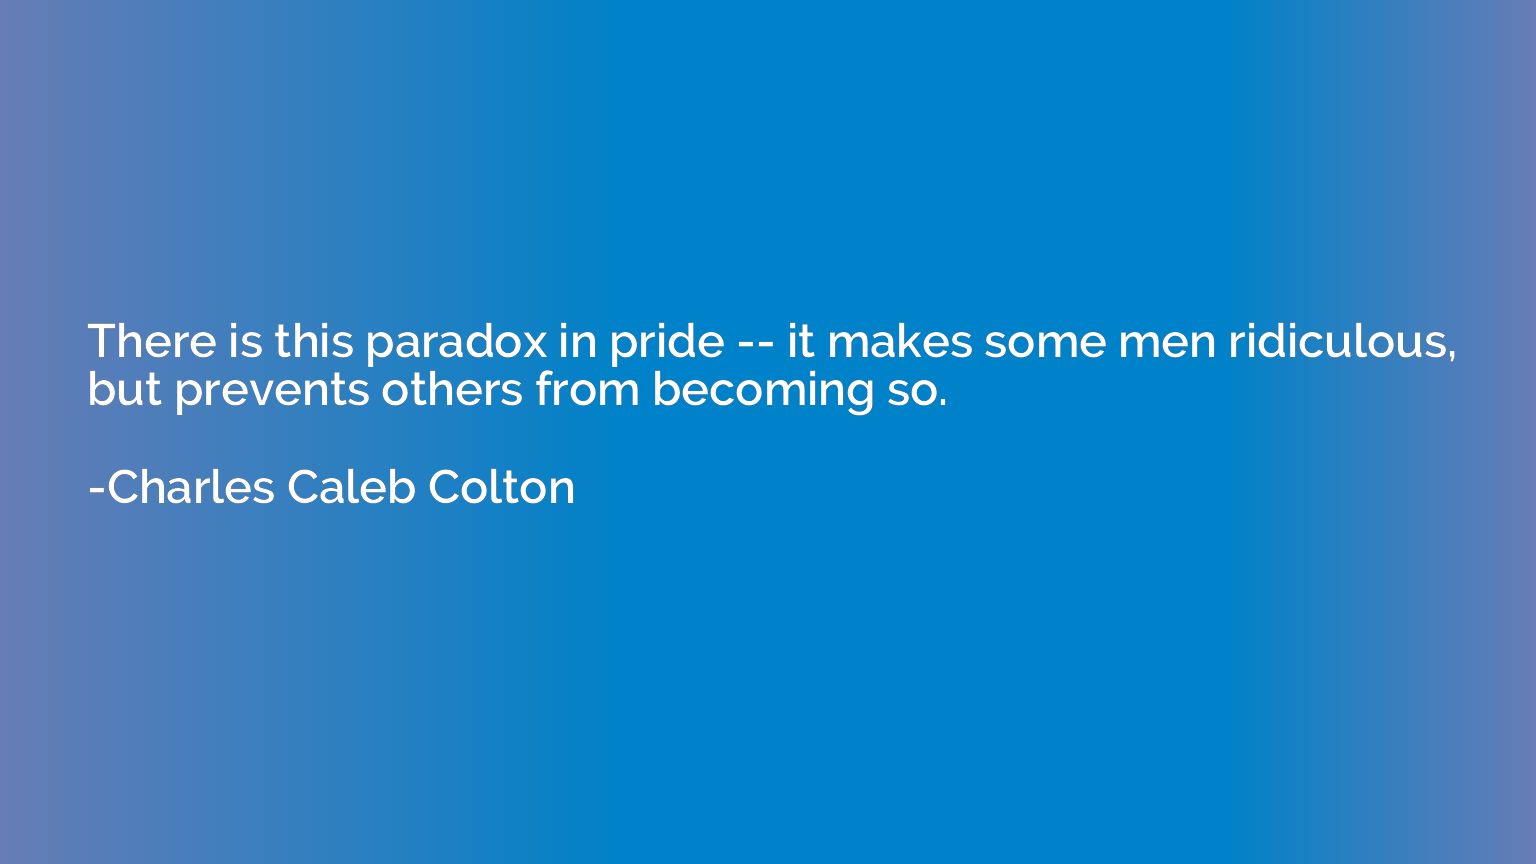 There is this paradox in pride -- it makes some men ridiculo